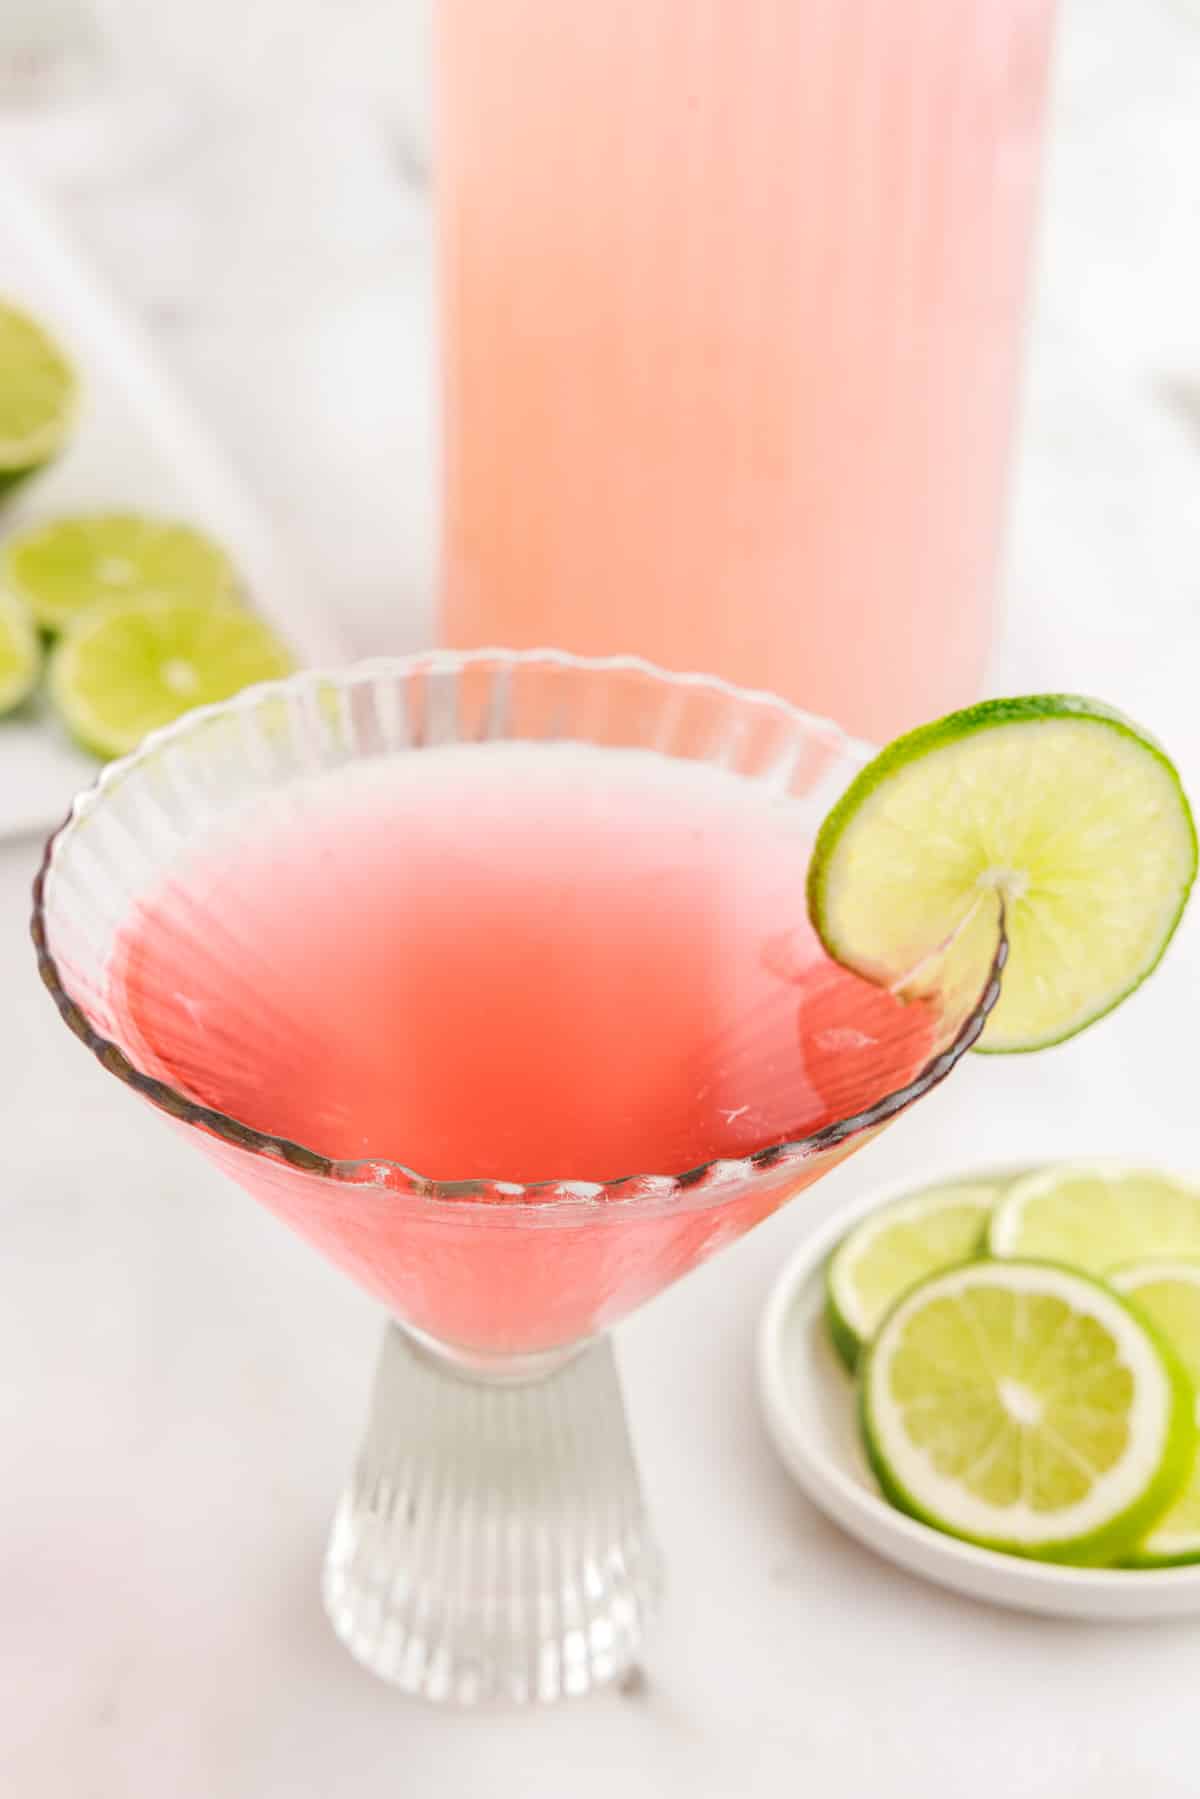 Decorative glass with Pink Flamingo Drink garnished with a lime next to a dish of limes.